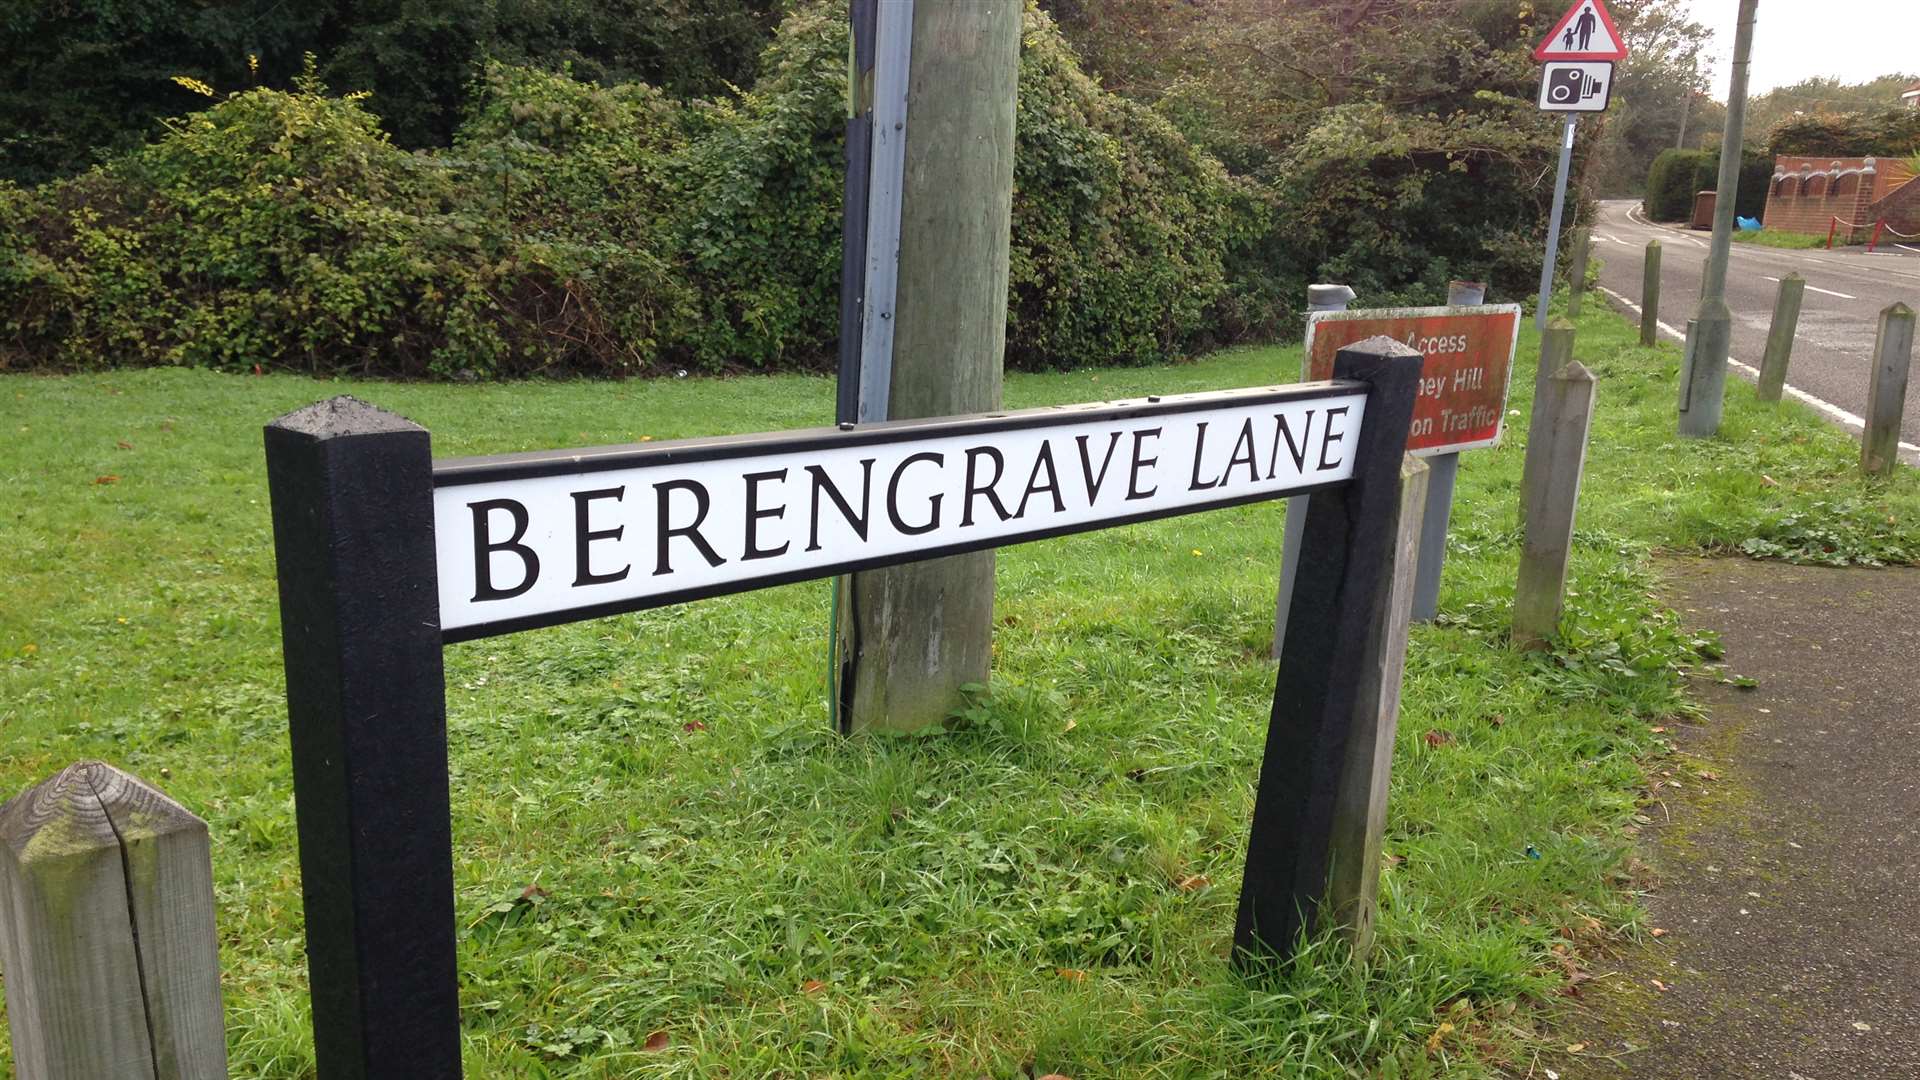 Berengrave Road, where the attack happened